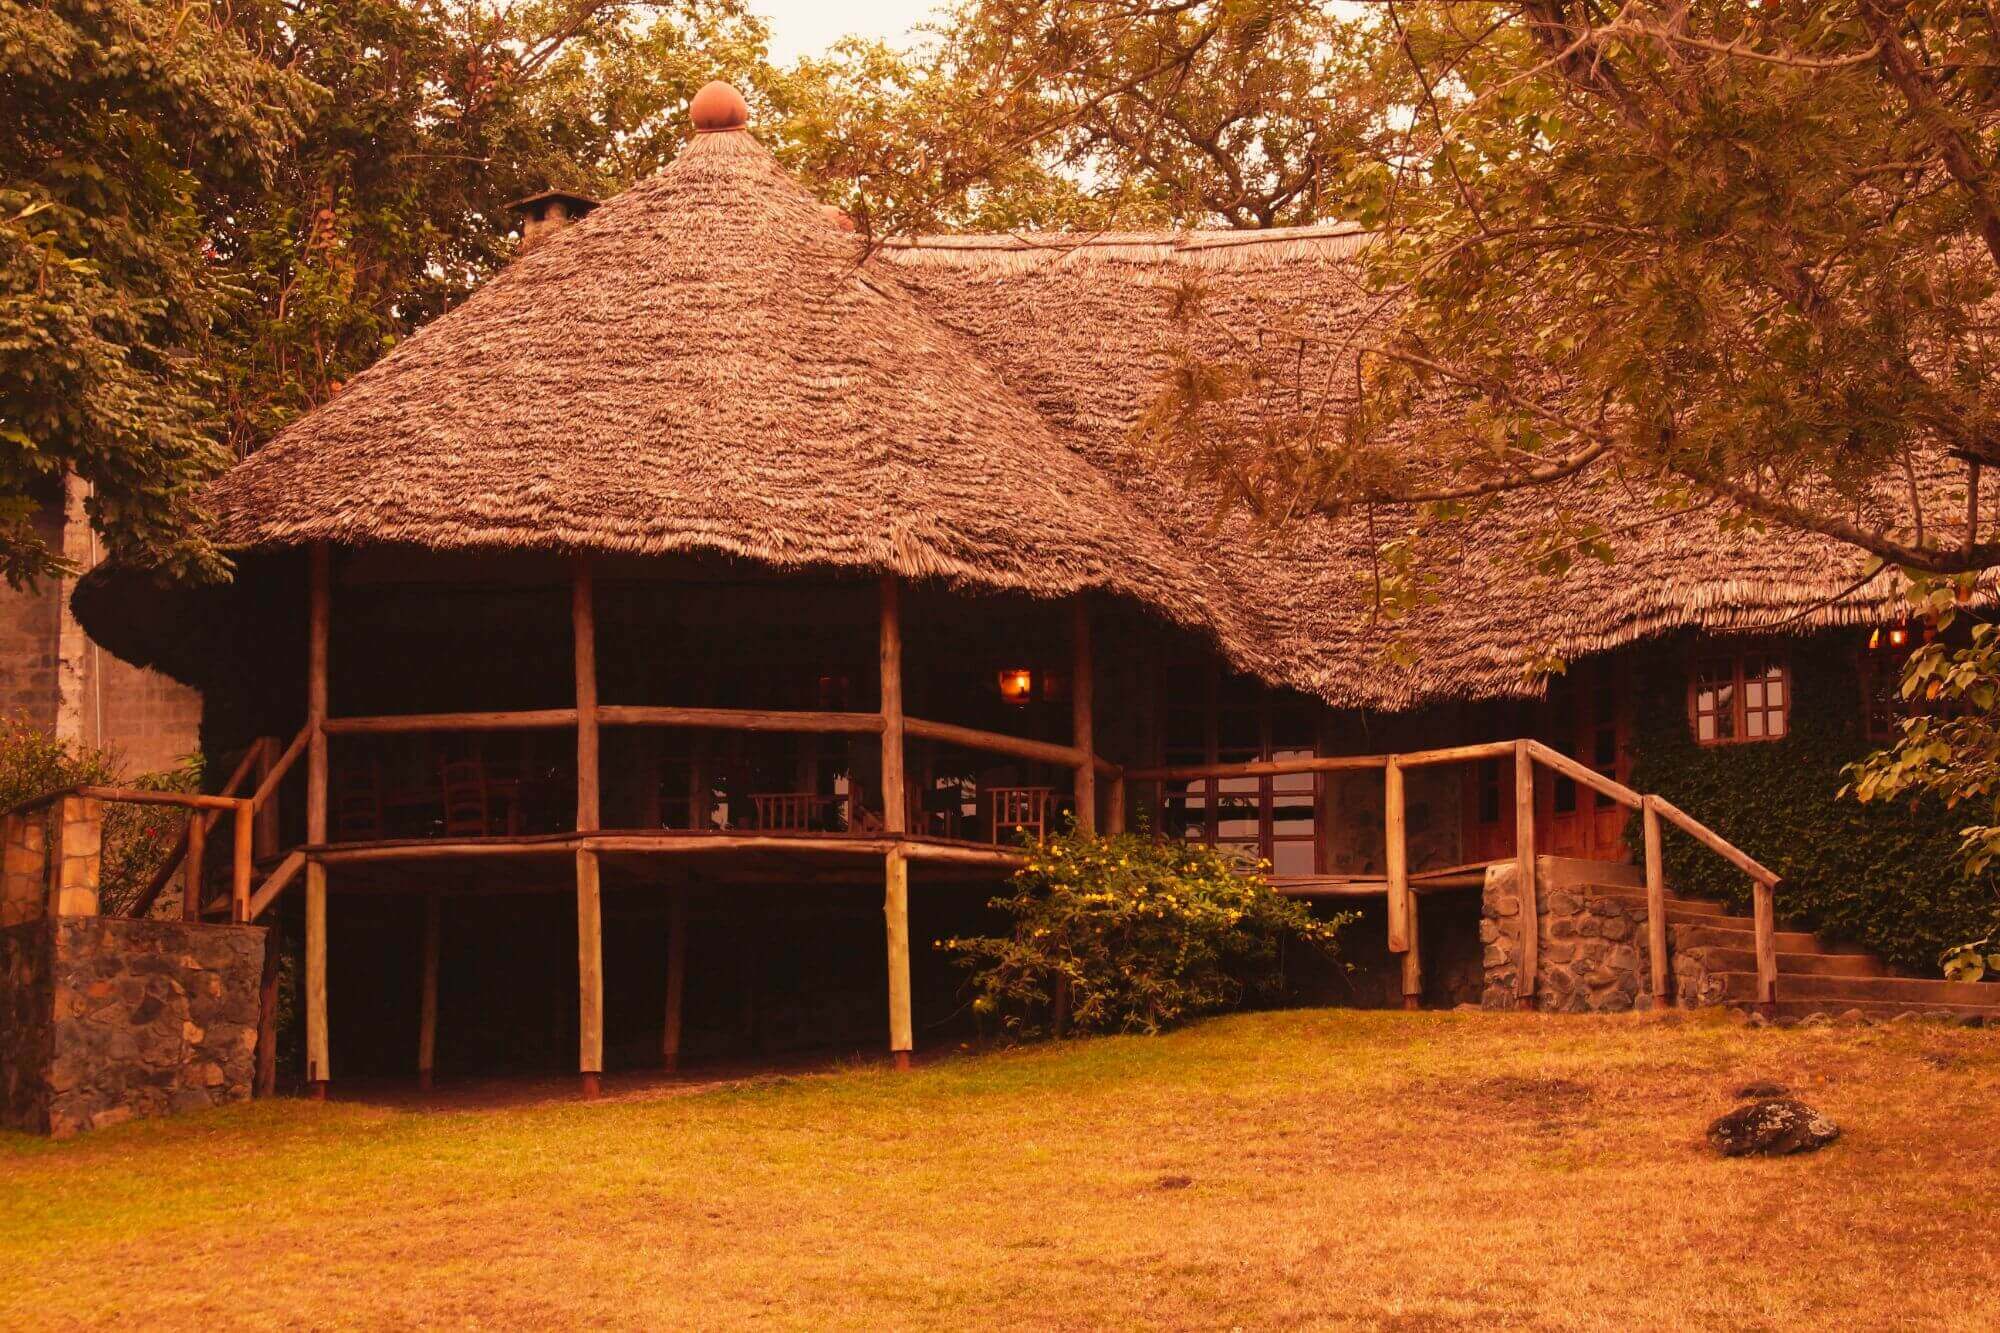 The African House (6)